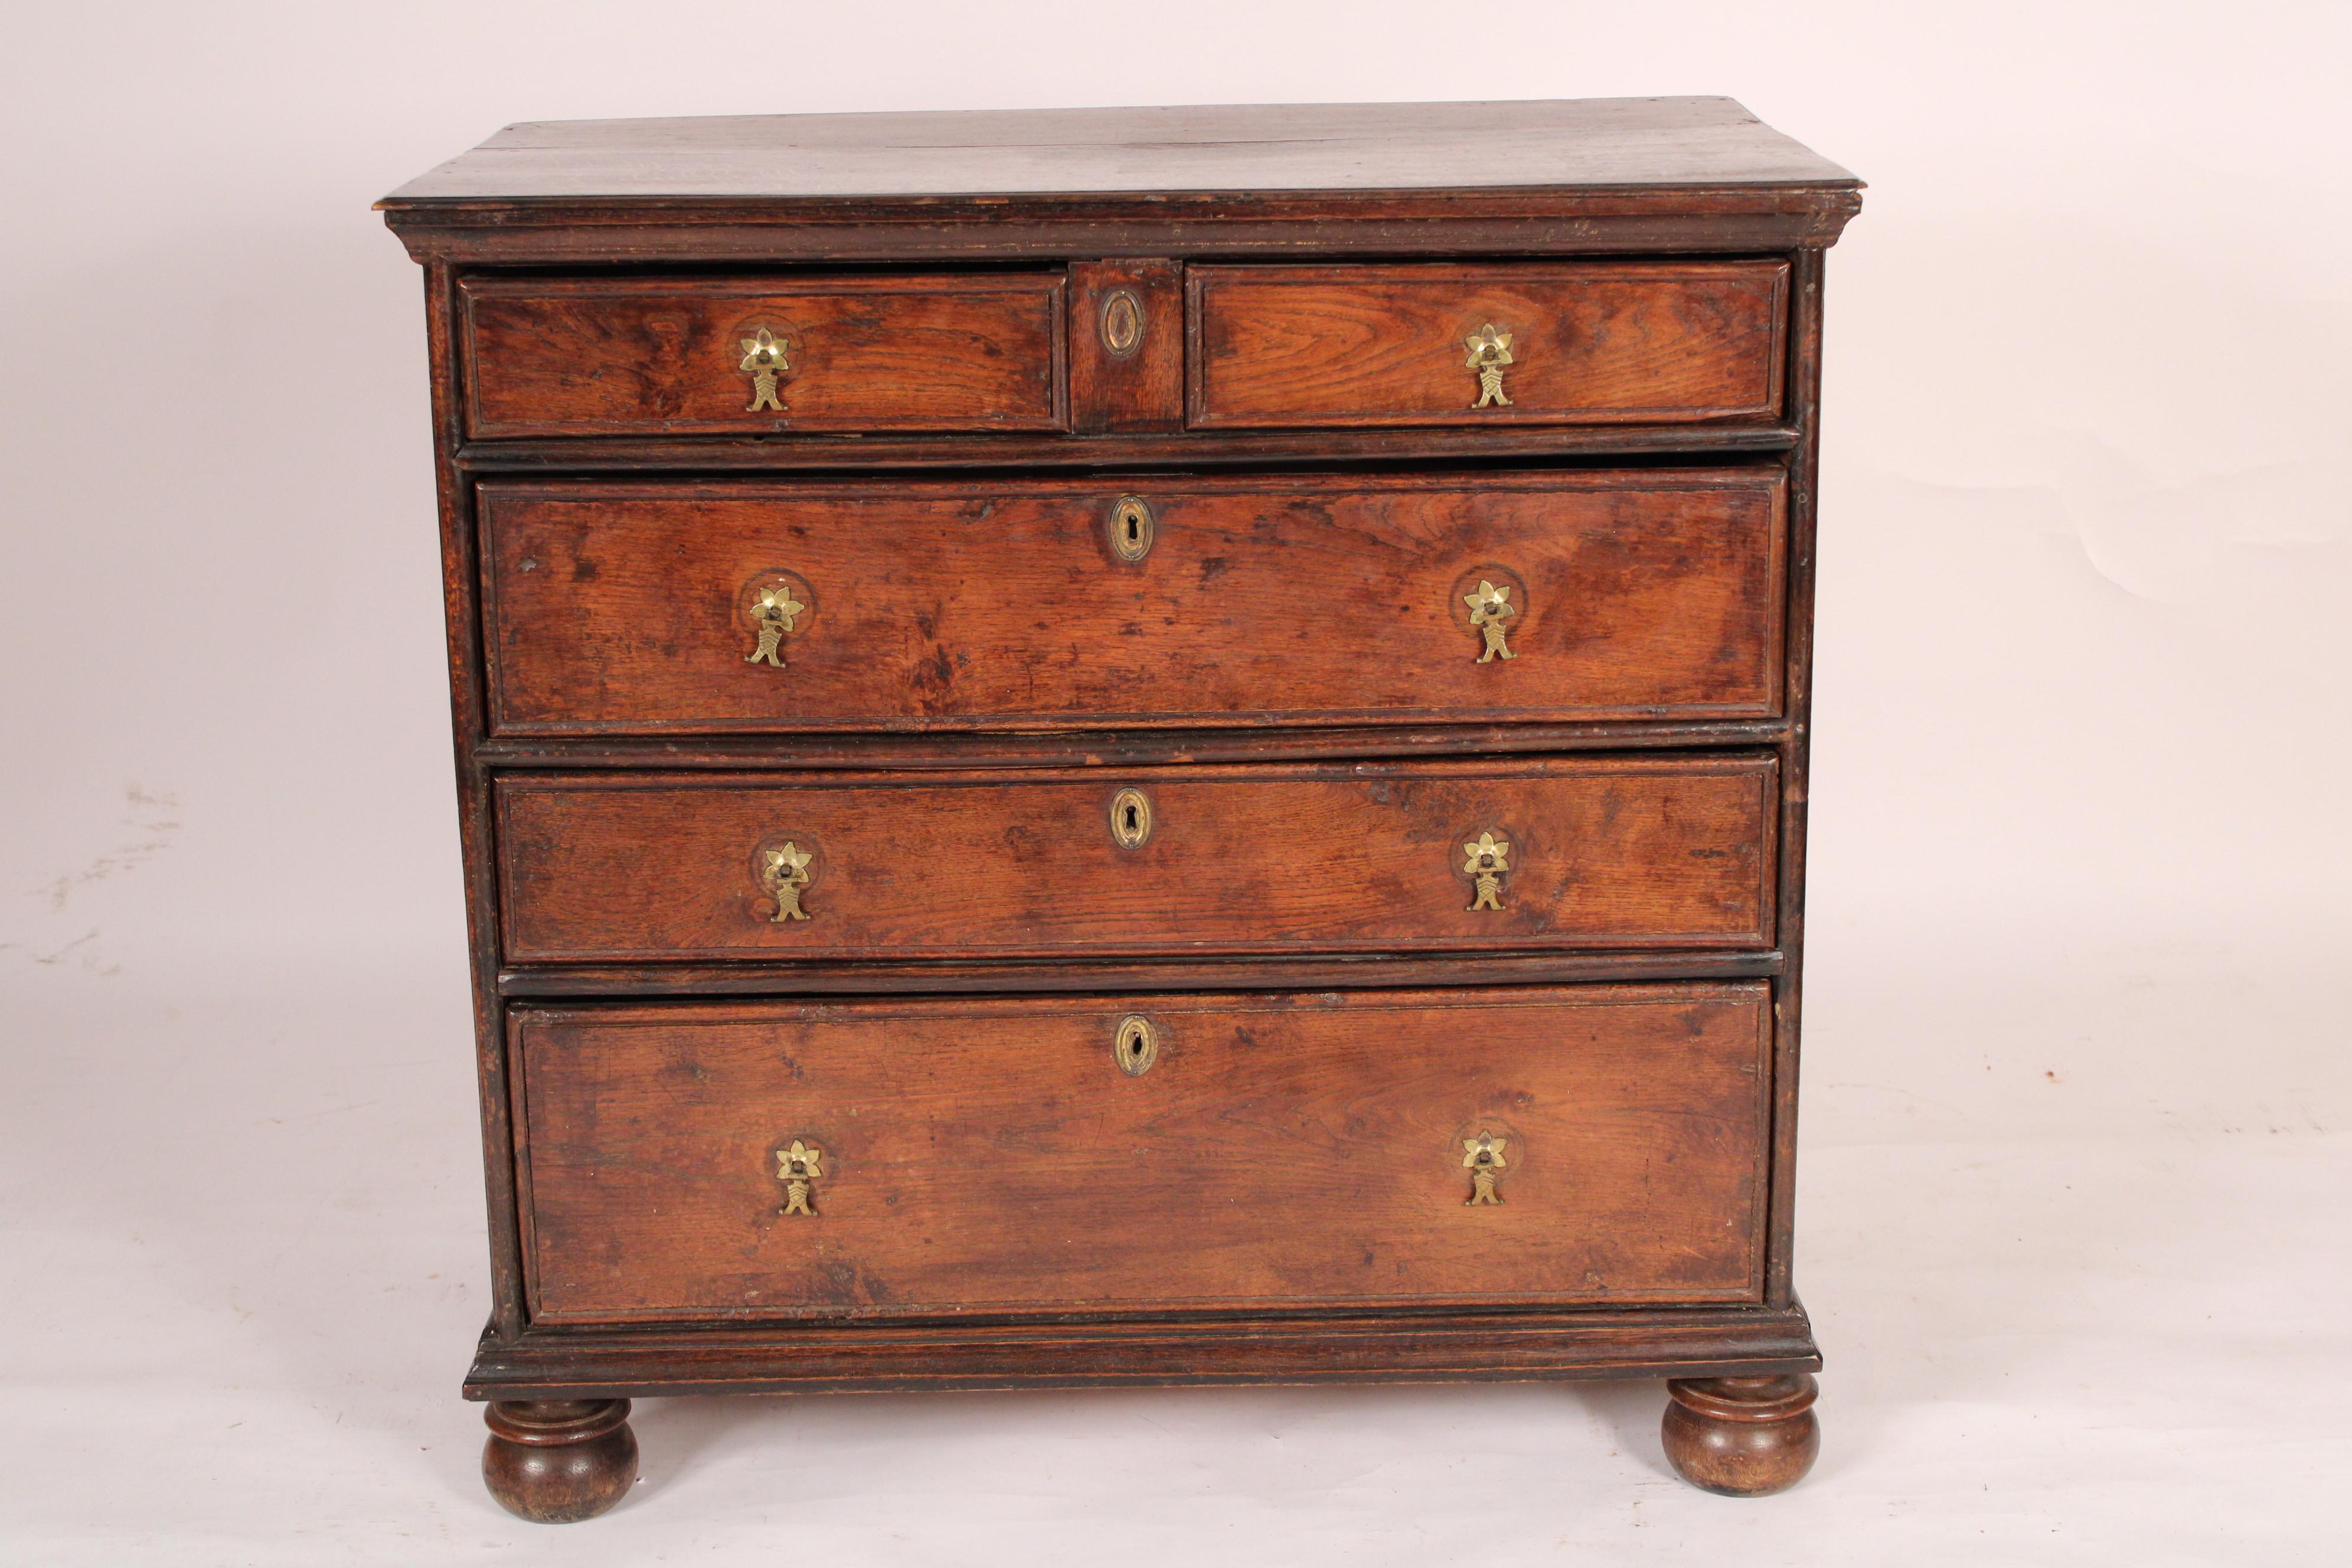 Antique William & Mary style oak chest of drawers, 18th century. With an overhanging quarter sawn oak top with thumb molded front and side edges, two top drawers over 3 lower drawers, resting on later bun feet.